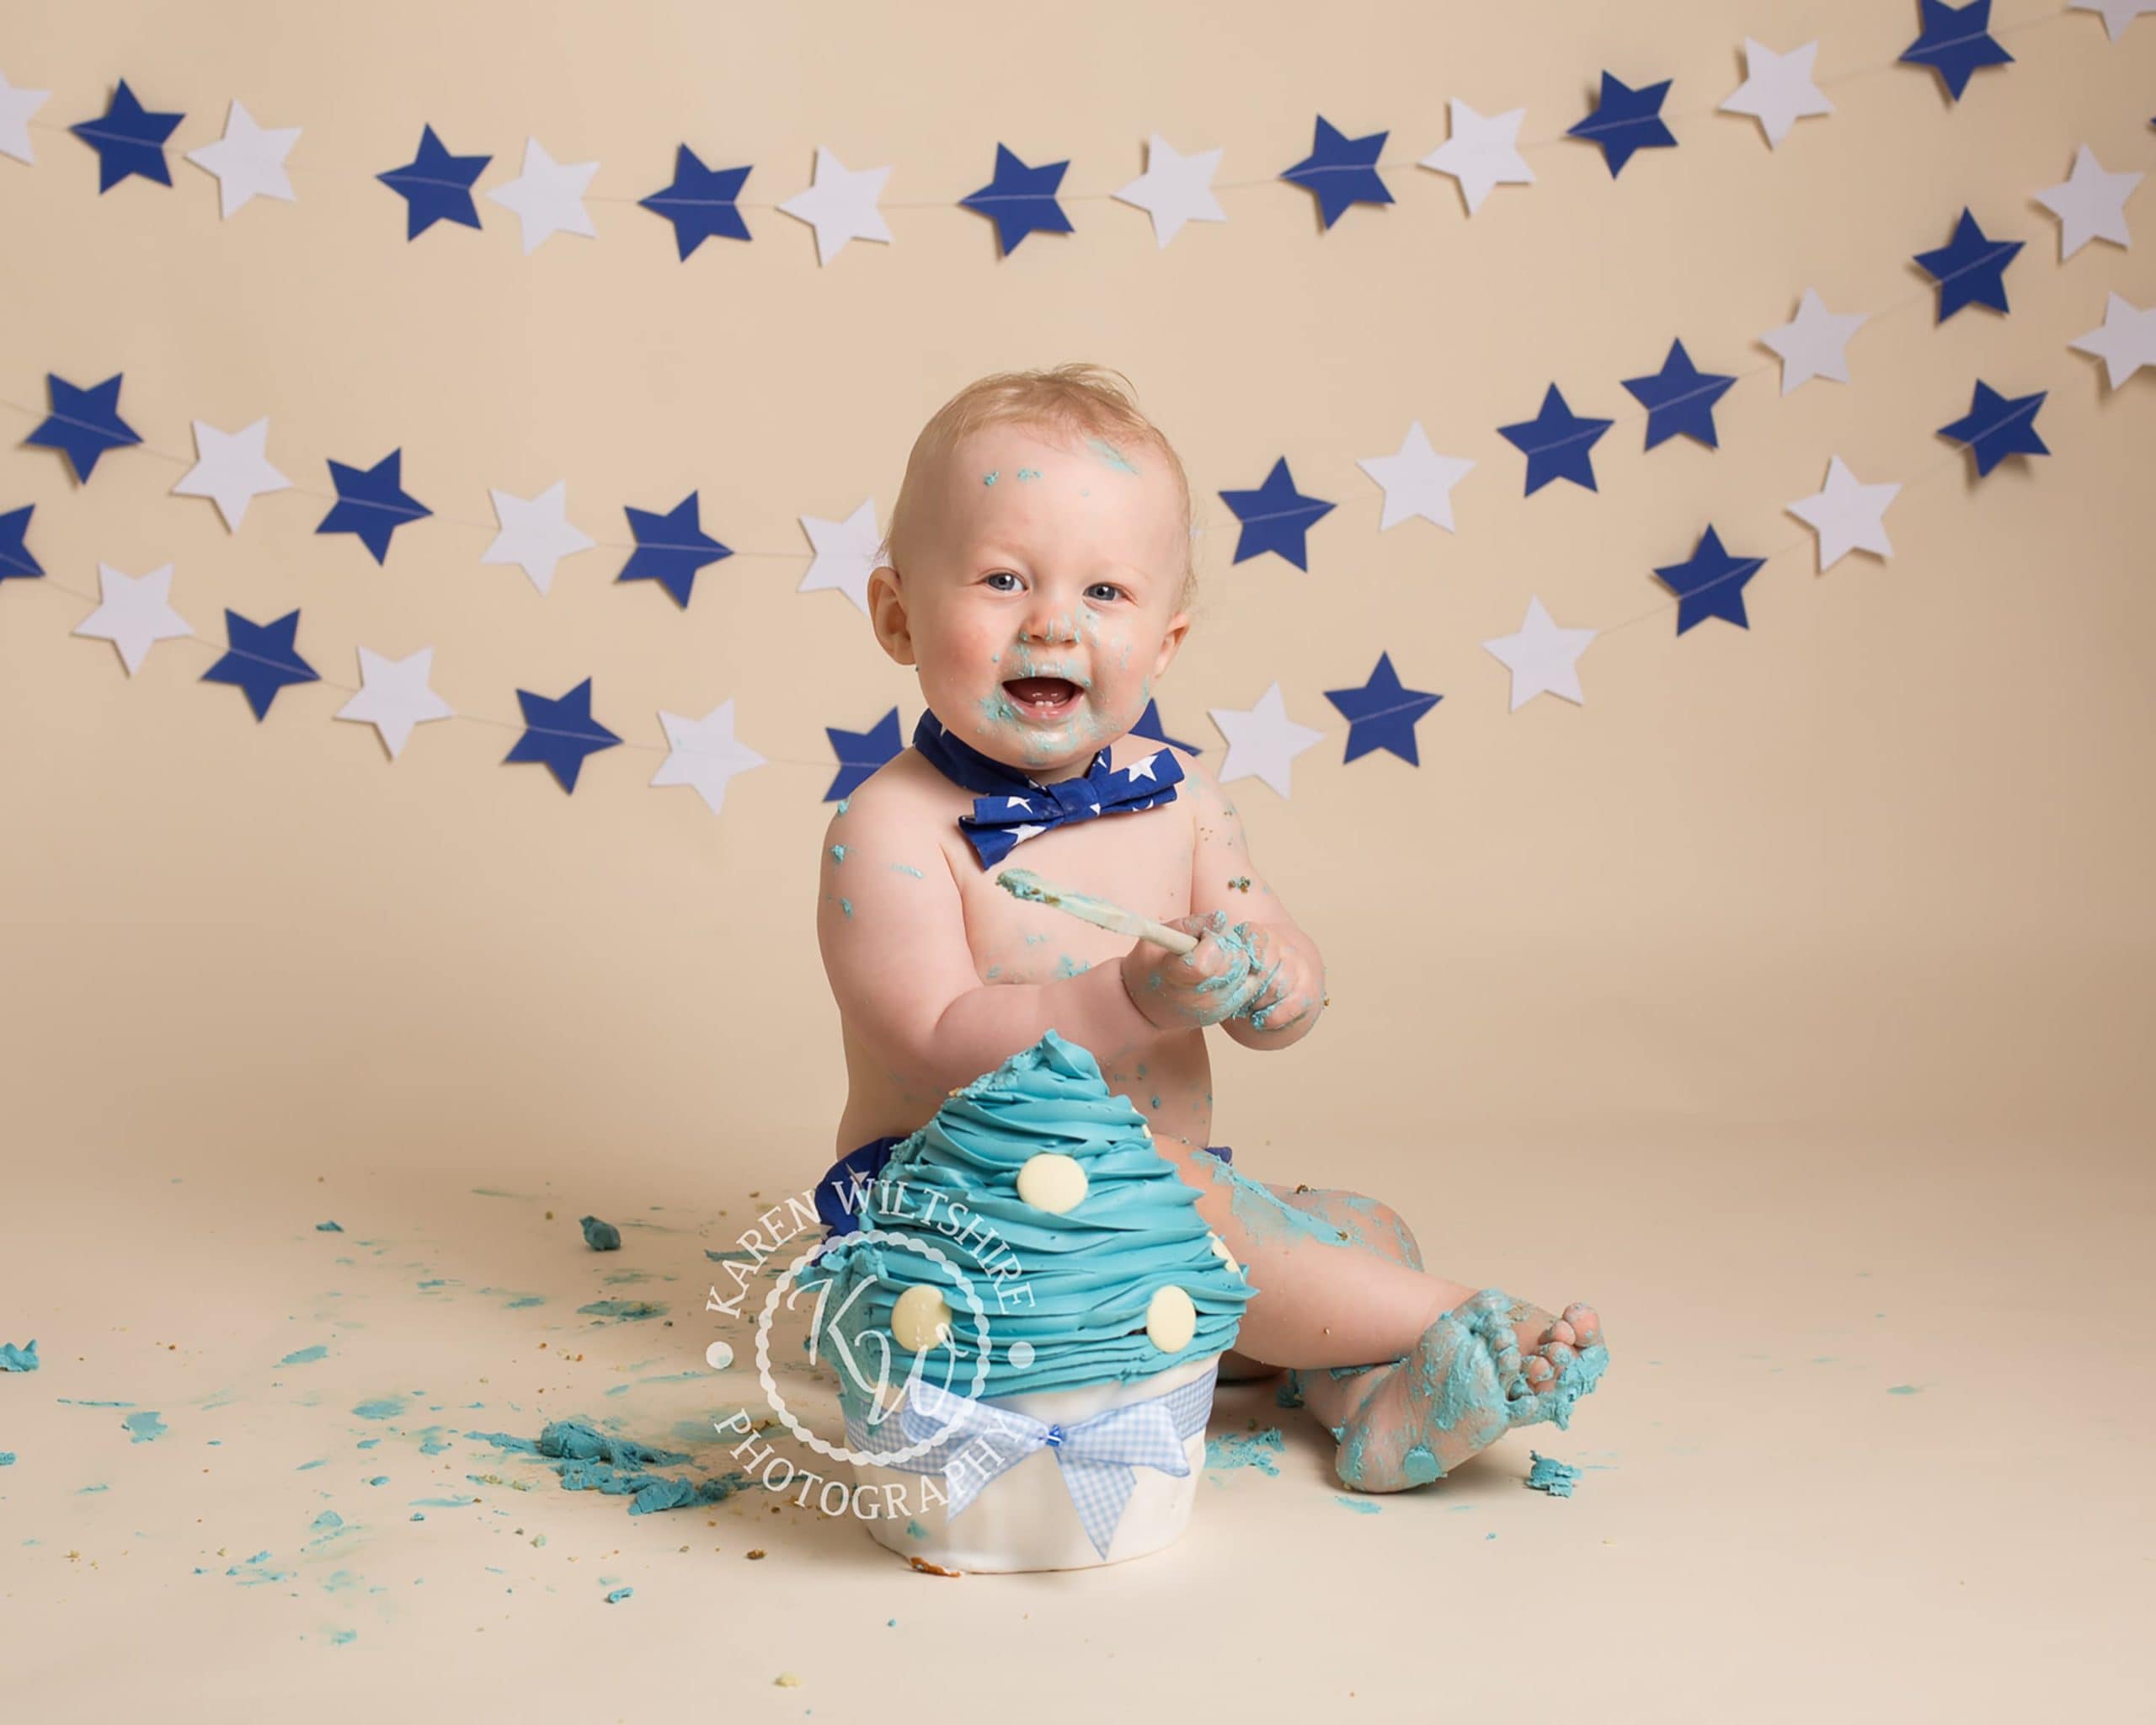 Baby boy enjoying a first birthday photoshoot with a large cupcake to smash